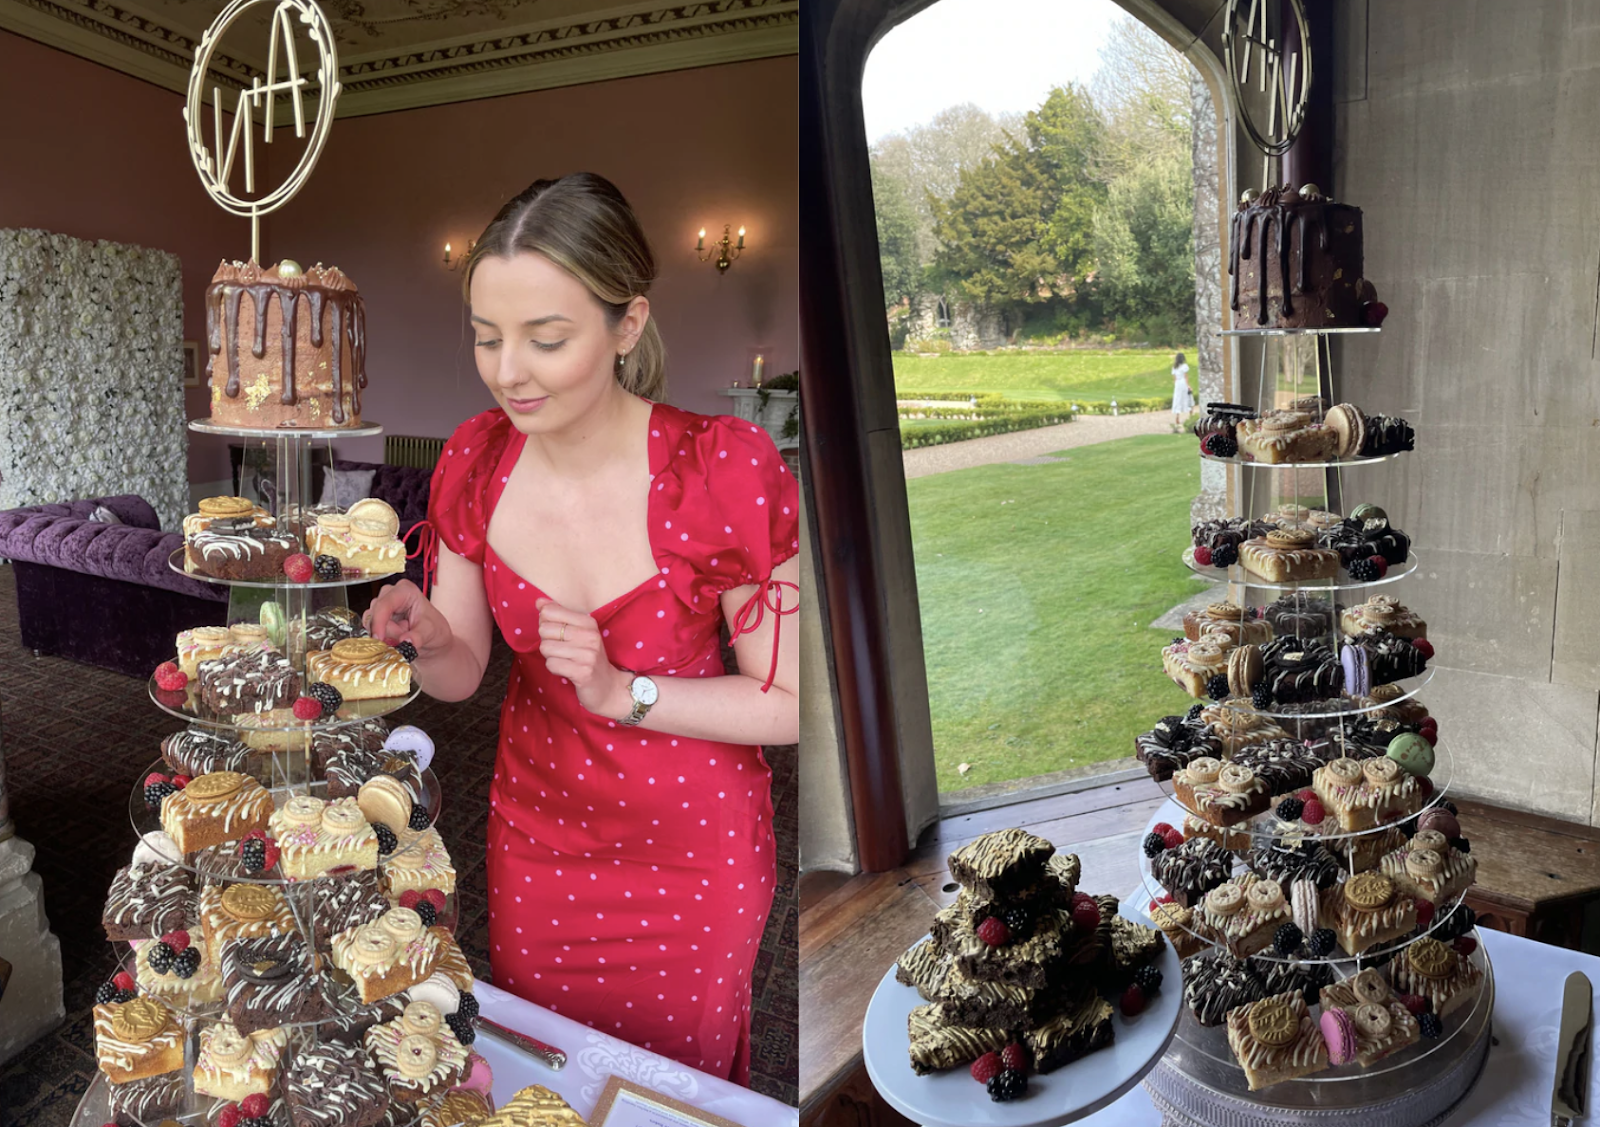 photo of girl in red dress standing by chocolate brownies and other wedding desserts